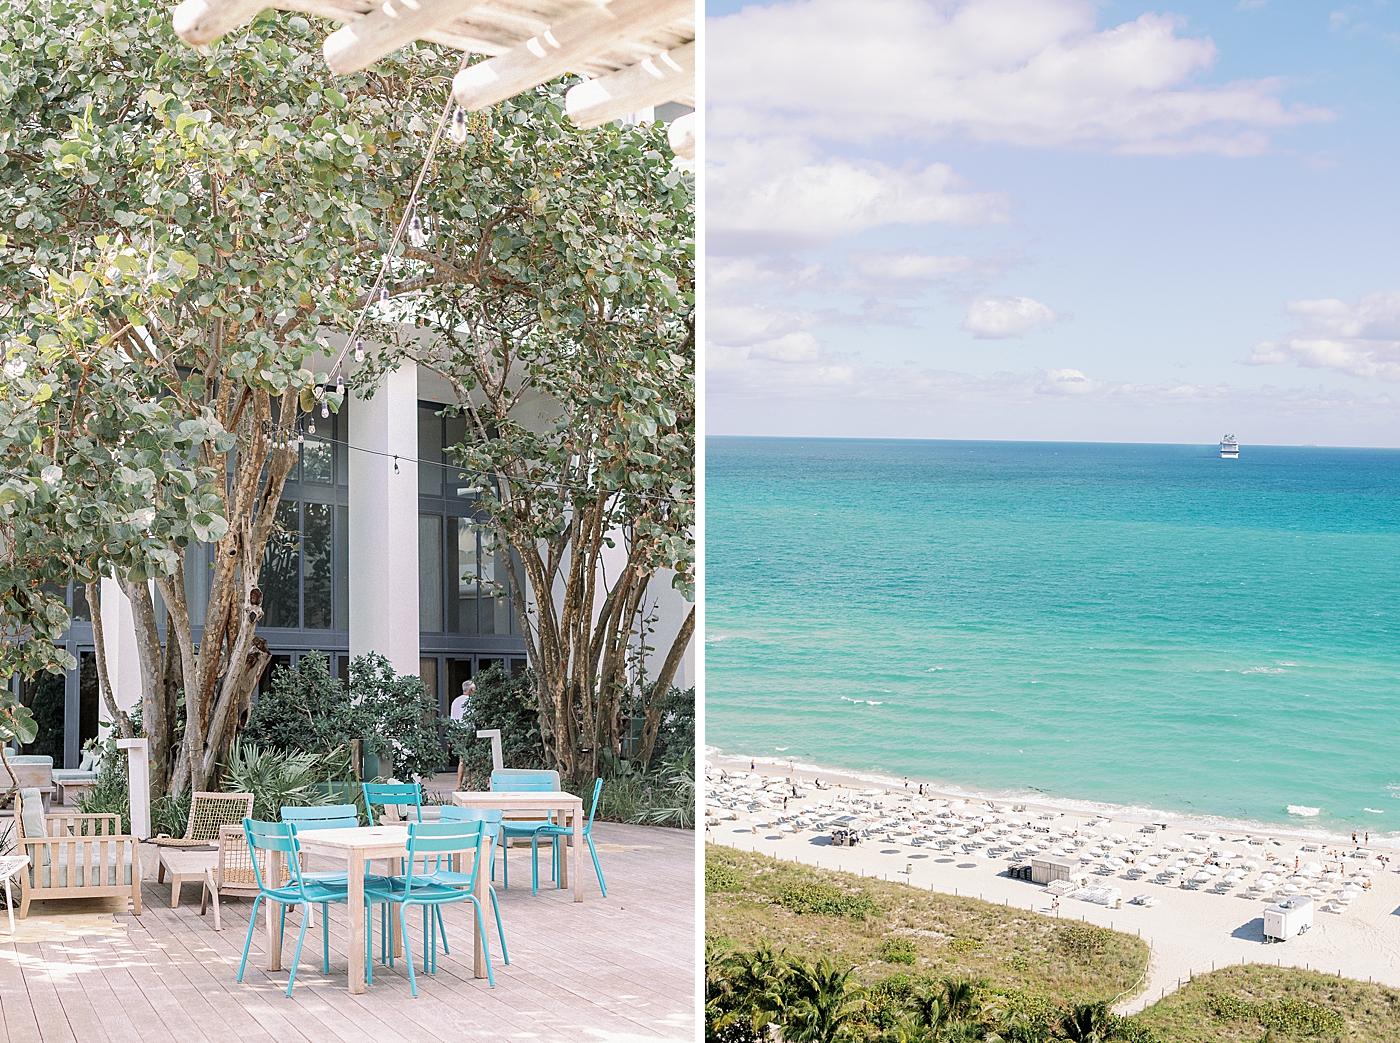 Detail shot of beach side resort with beach chairs Modern Elegant Wedding at The W South Beach captured by South Florida Wedding Photographer Erika Tuesta Photography